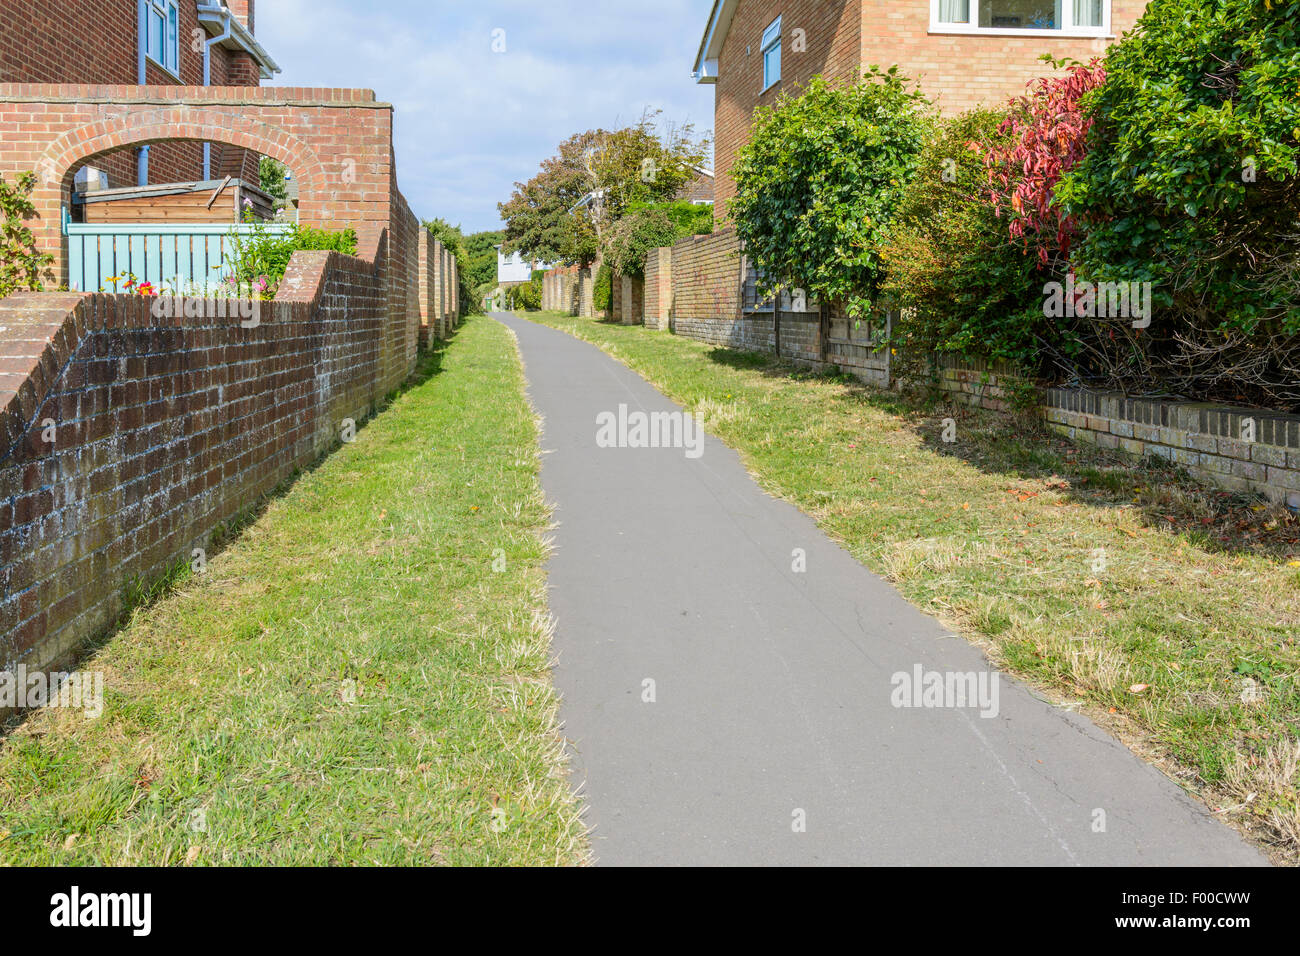 Narrow alleyway or Twitten passage way going between houses in a residential area in the UK. Stock Photo